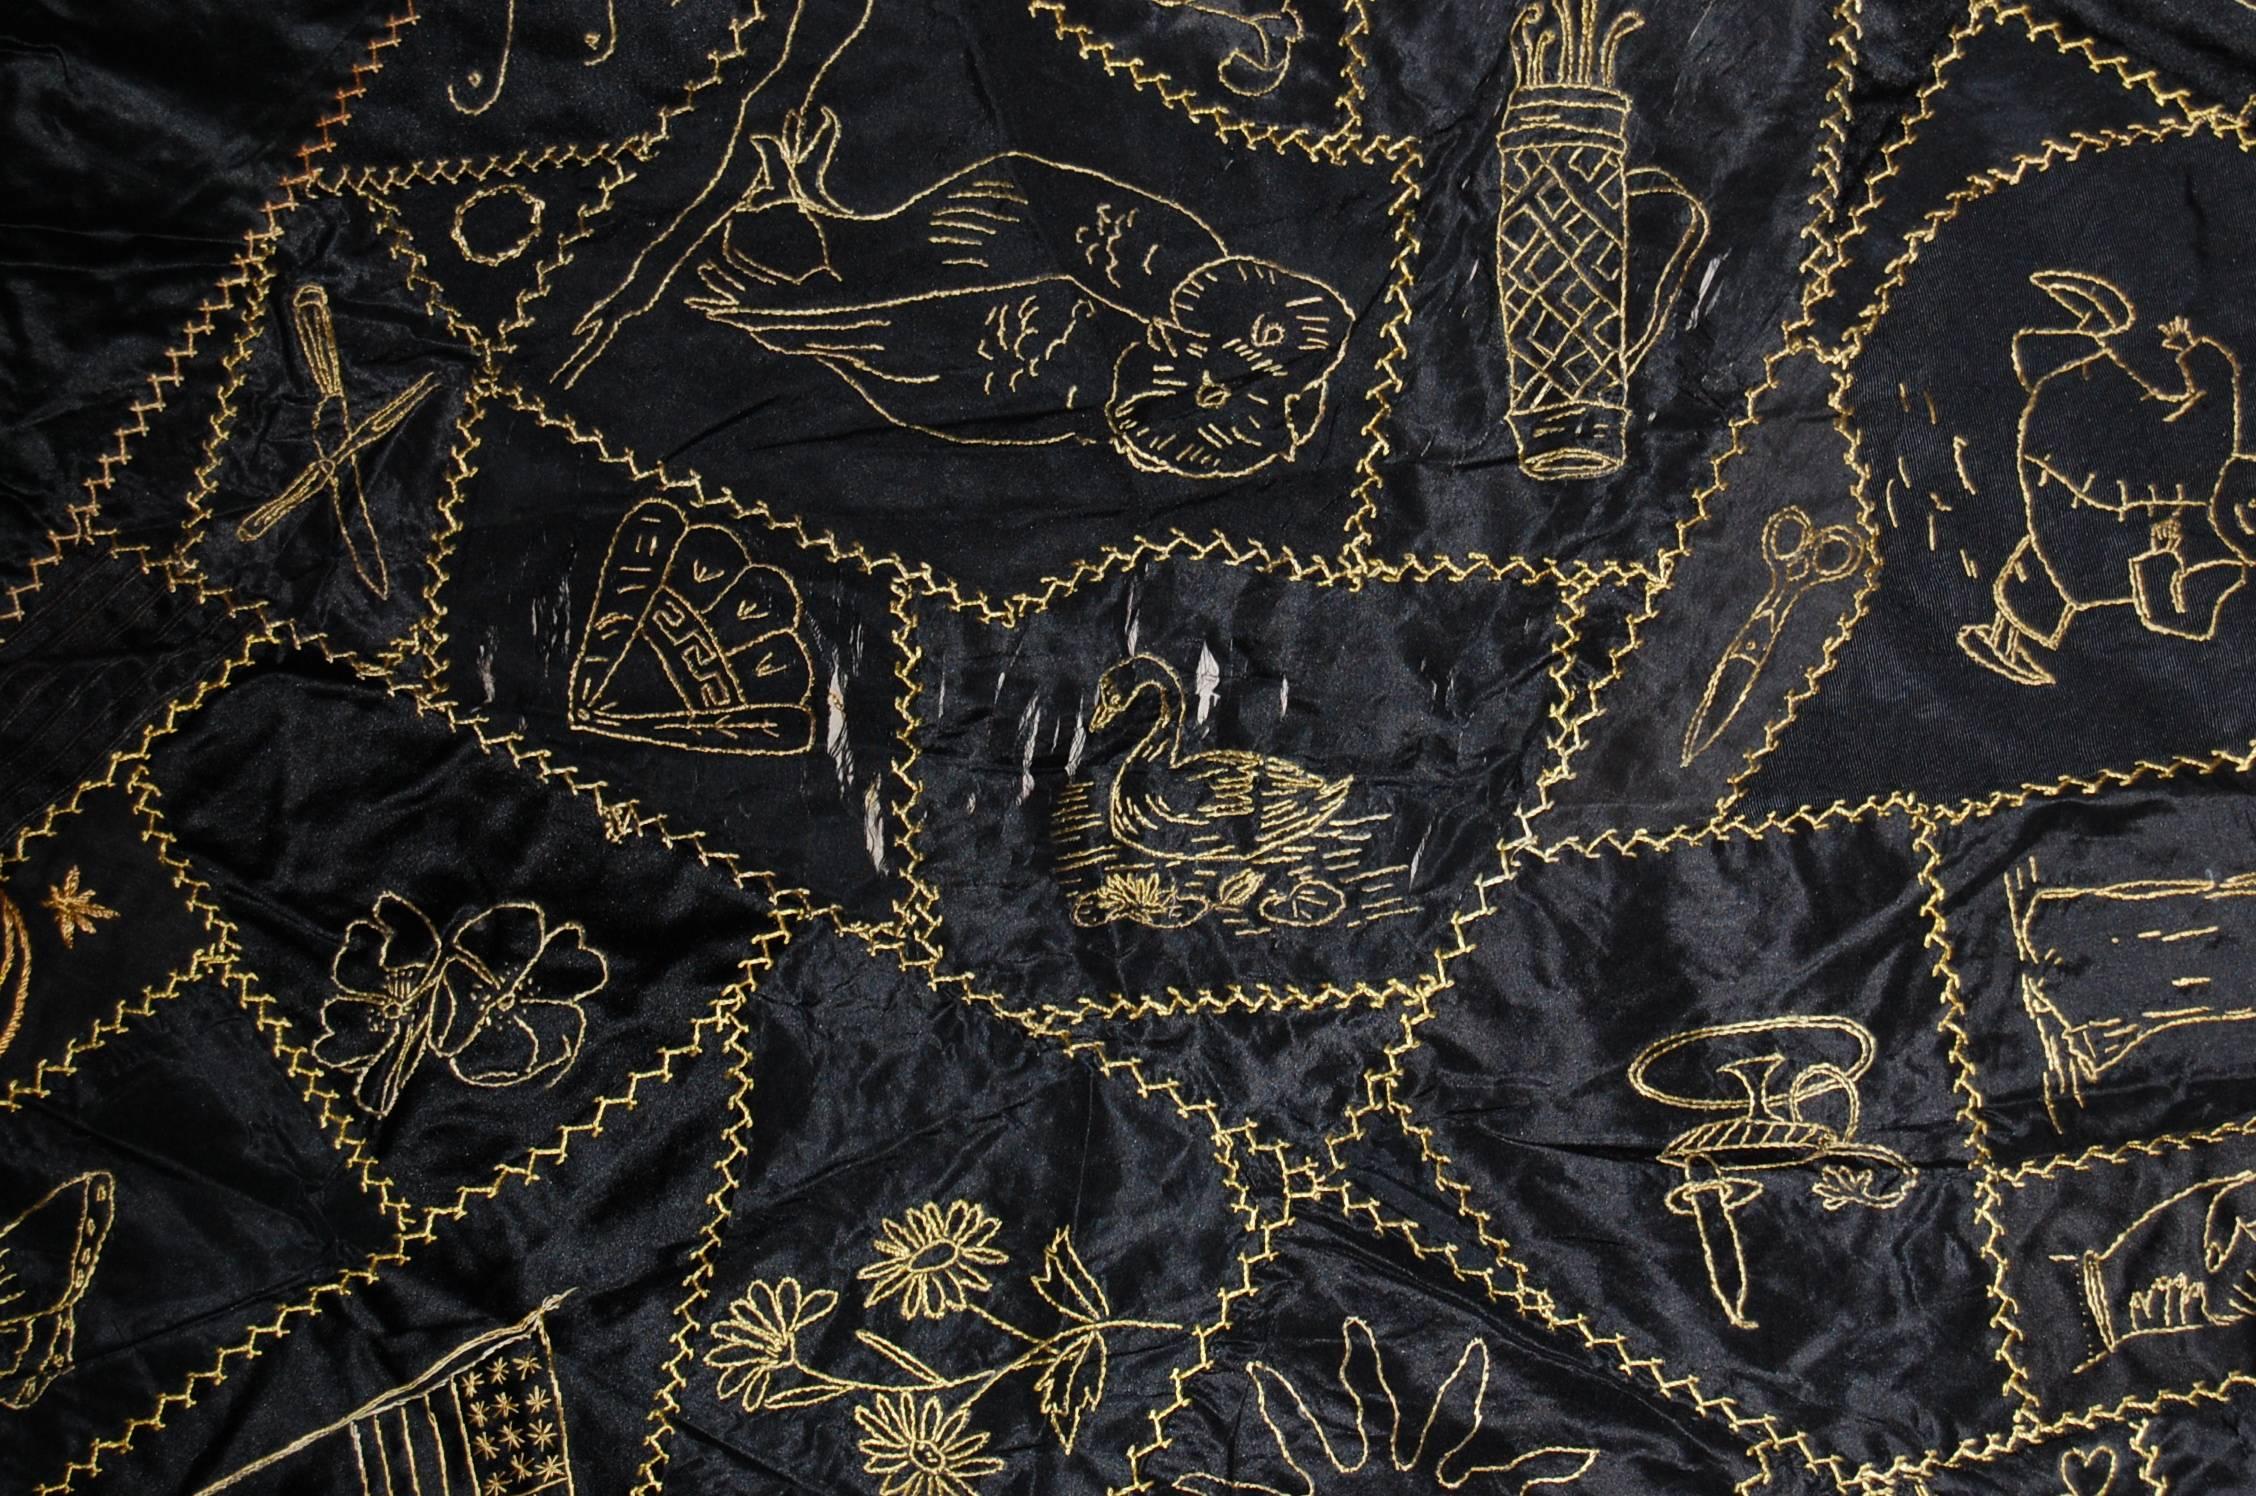 New England Silk Quilt with Gold Embroidery in Excellent Condition, 1901, Boston 3